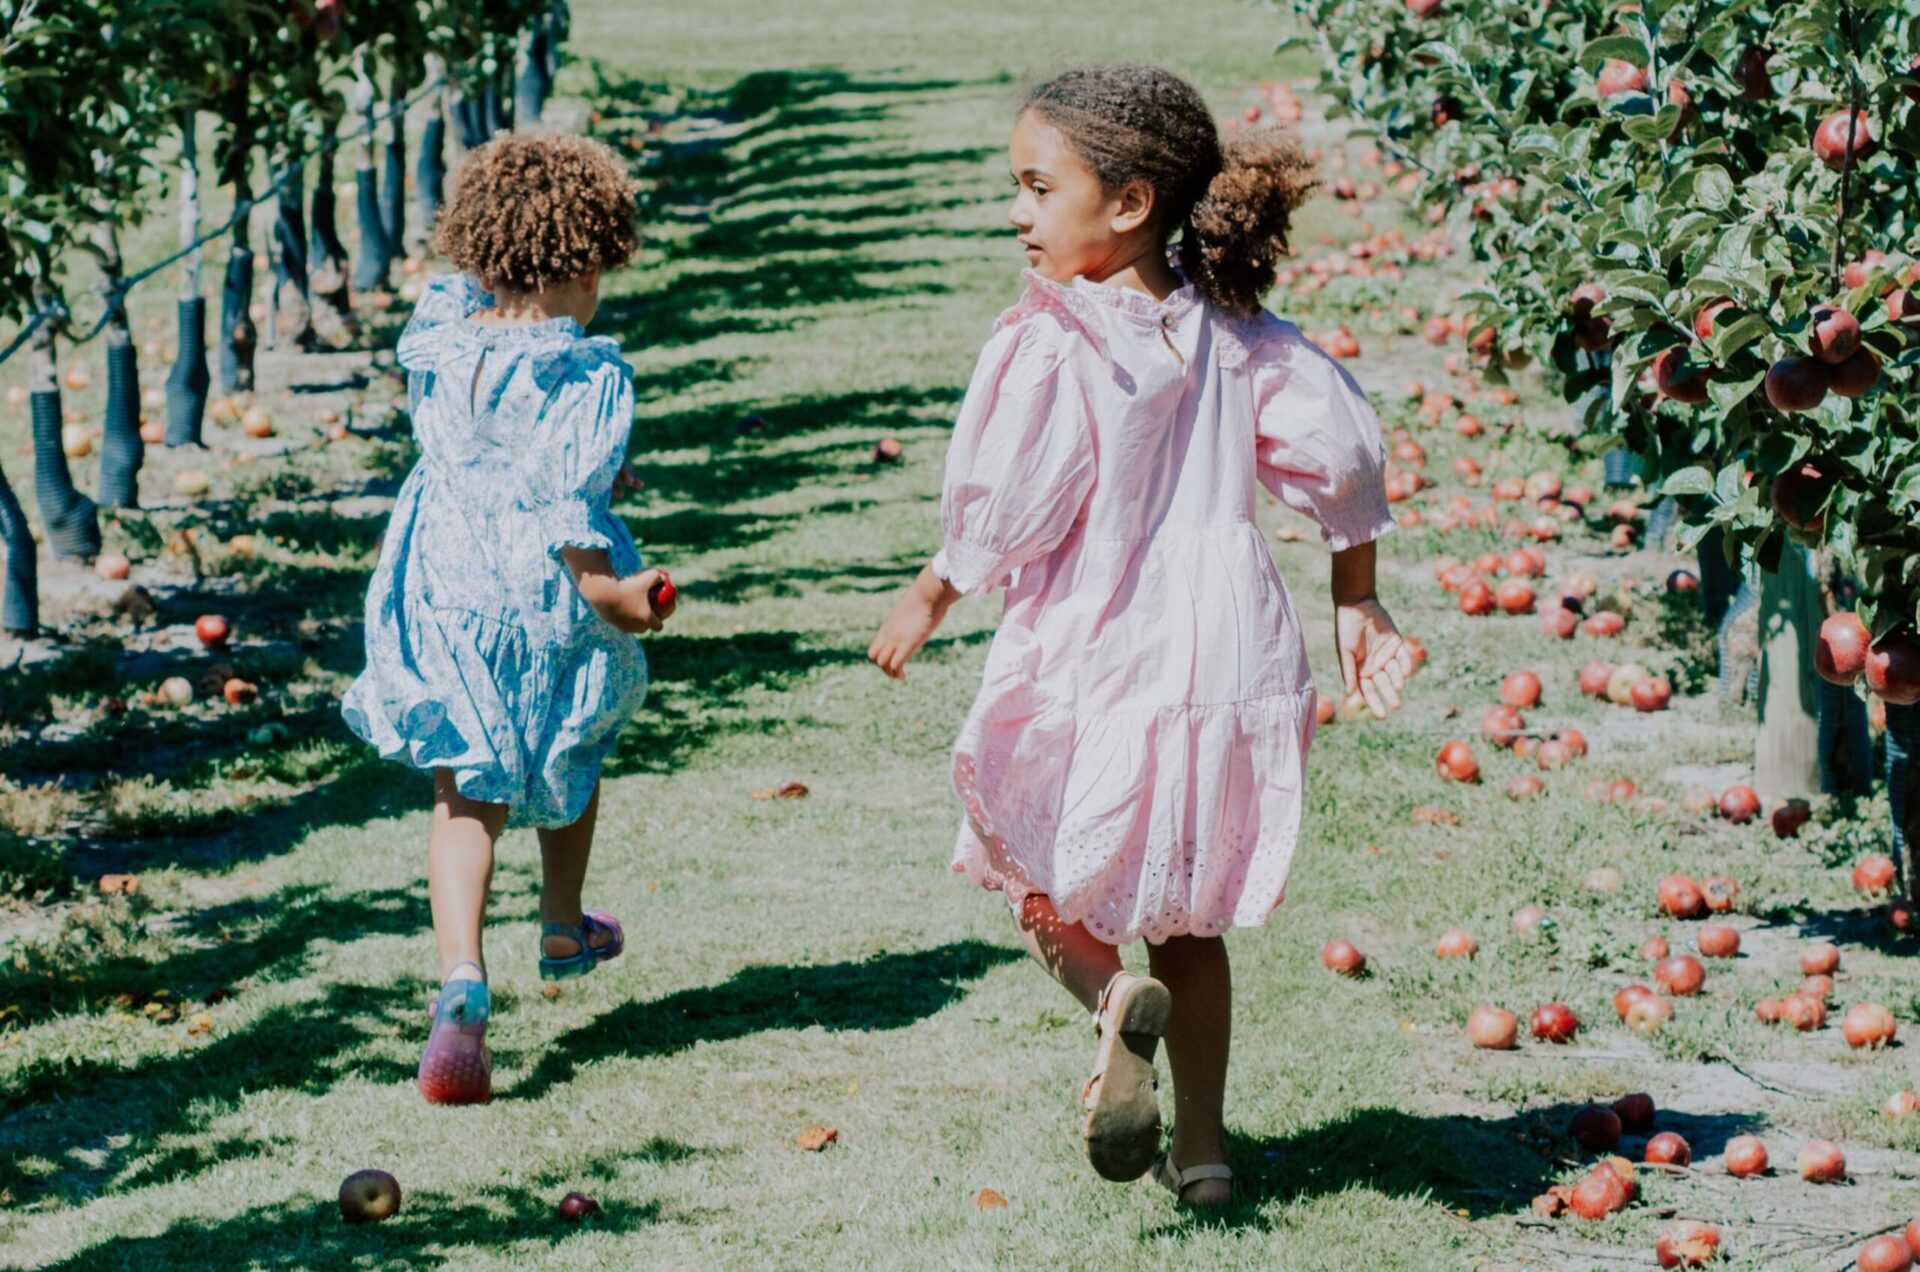 two kids running through field of apples, one wearing pink dress, the other wear blue